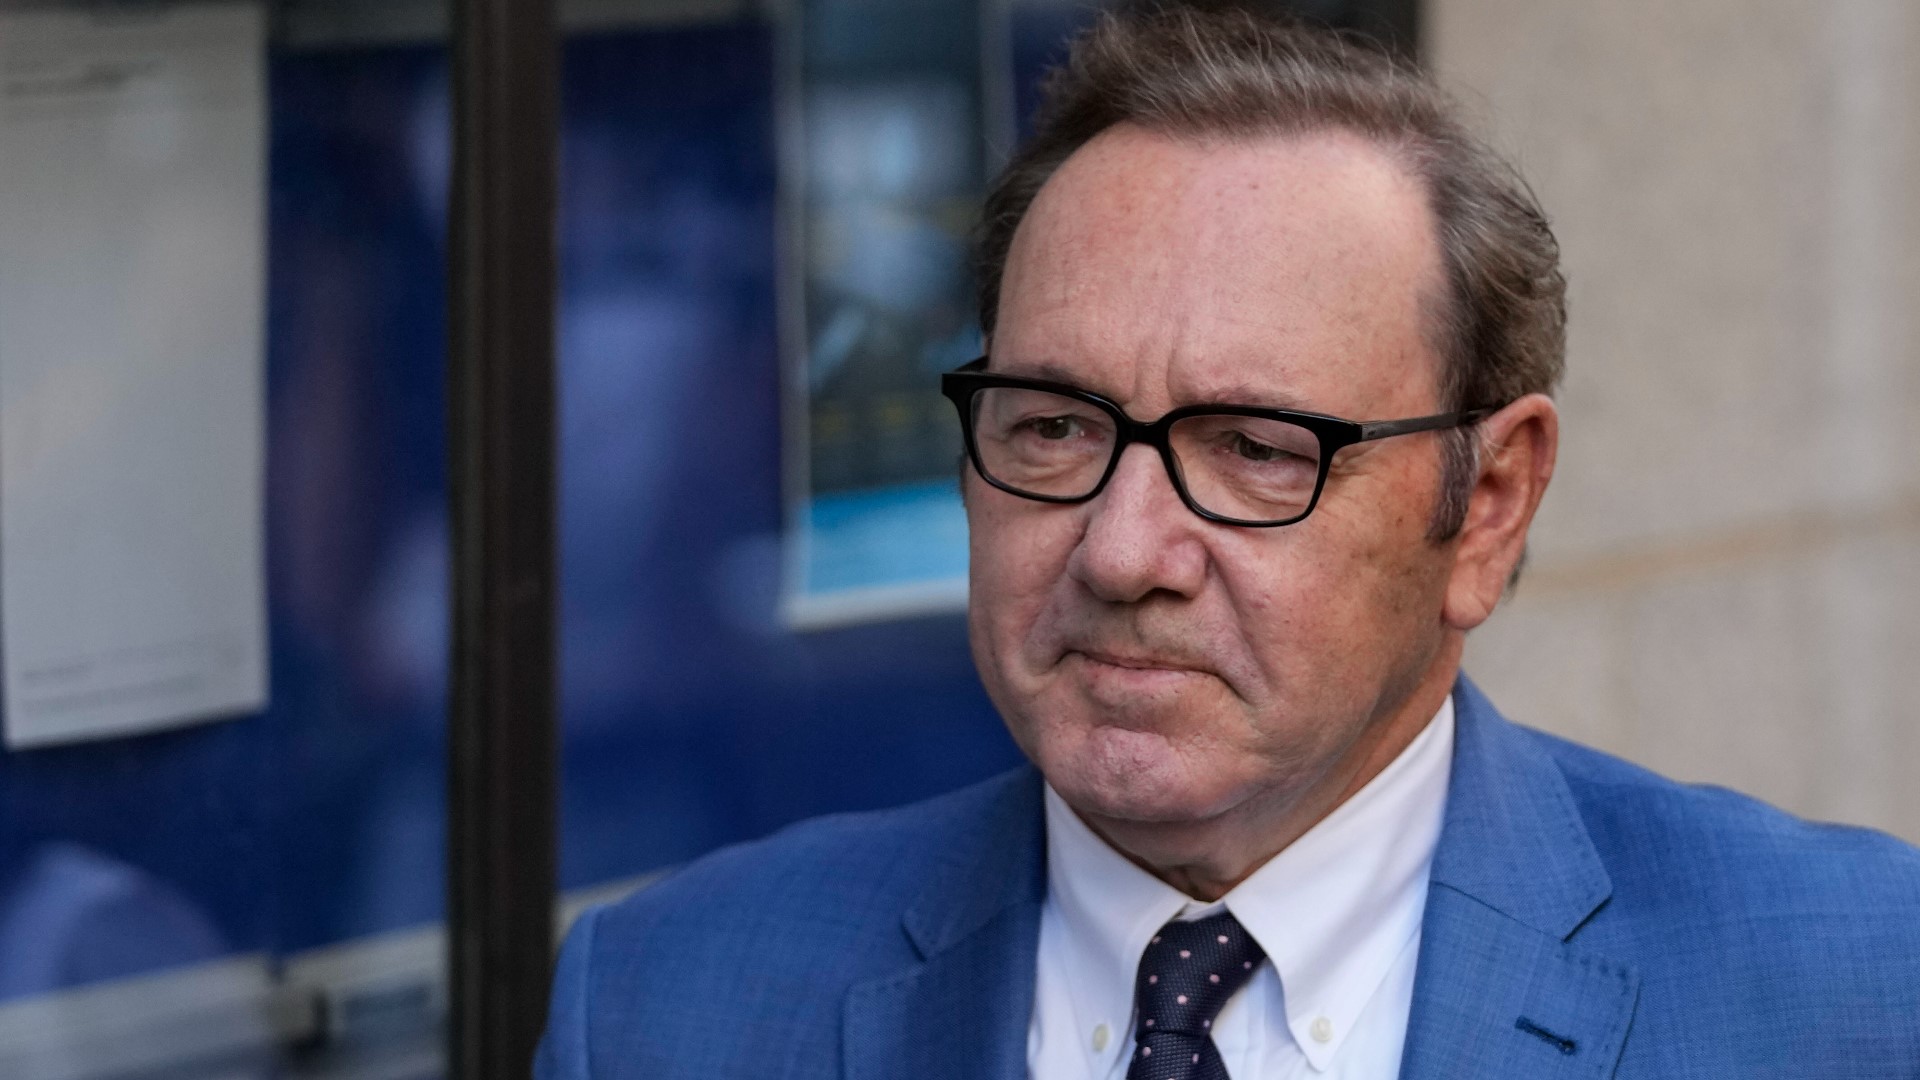 Kevin Spacey faces sex assault trial in London ktvb image